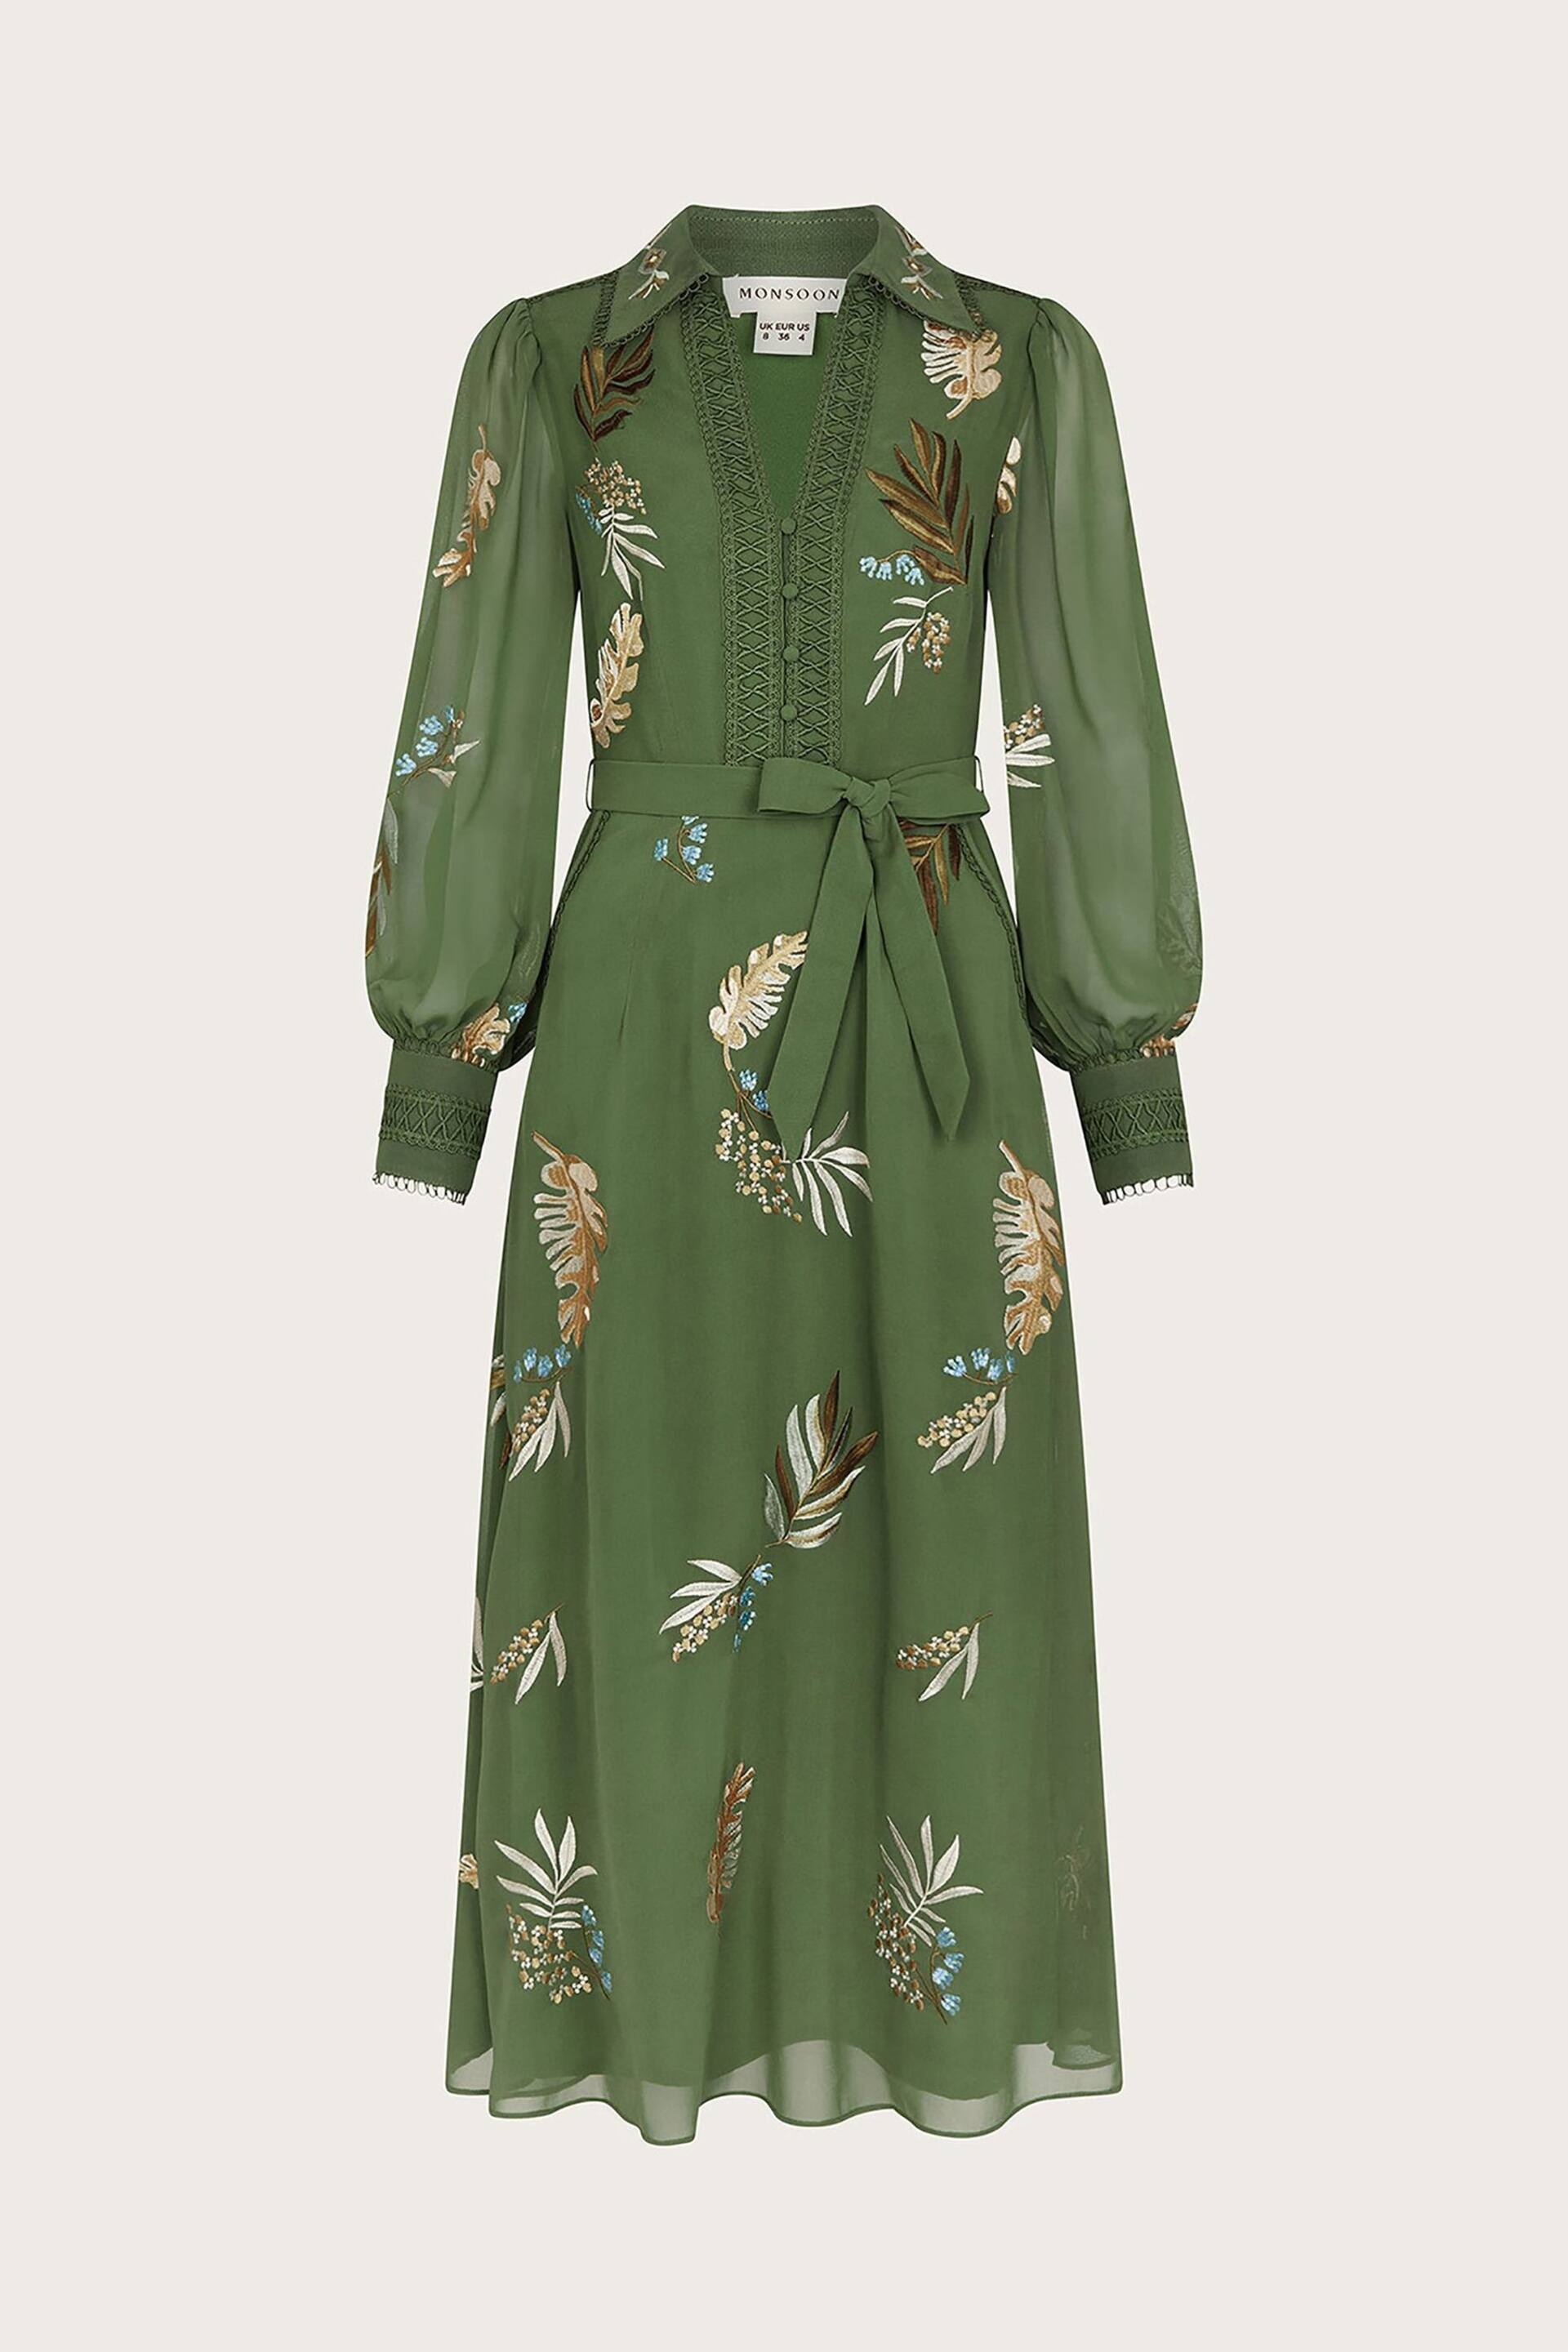 Monsoon Green Erin Embroidered Shirt Dress - Image 5 of 5